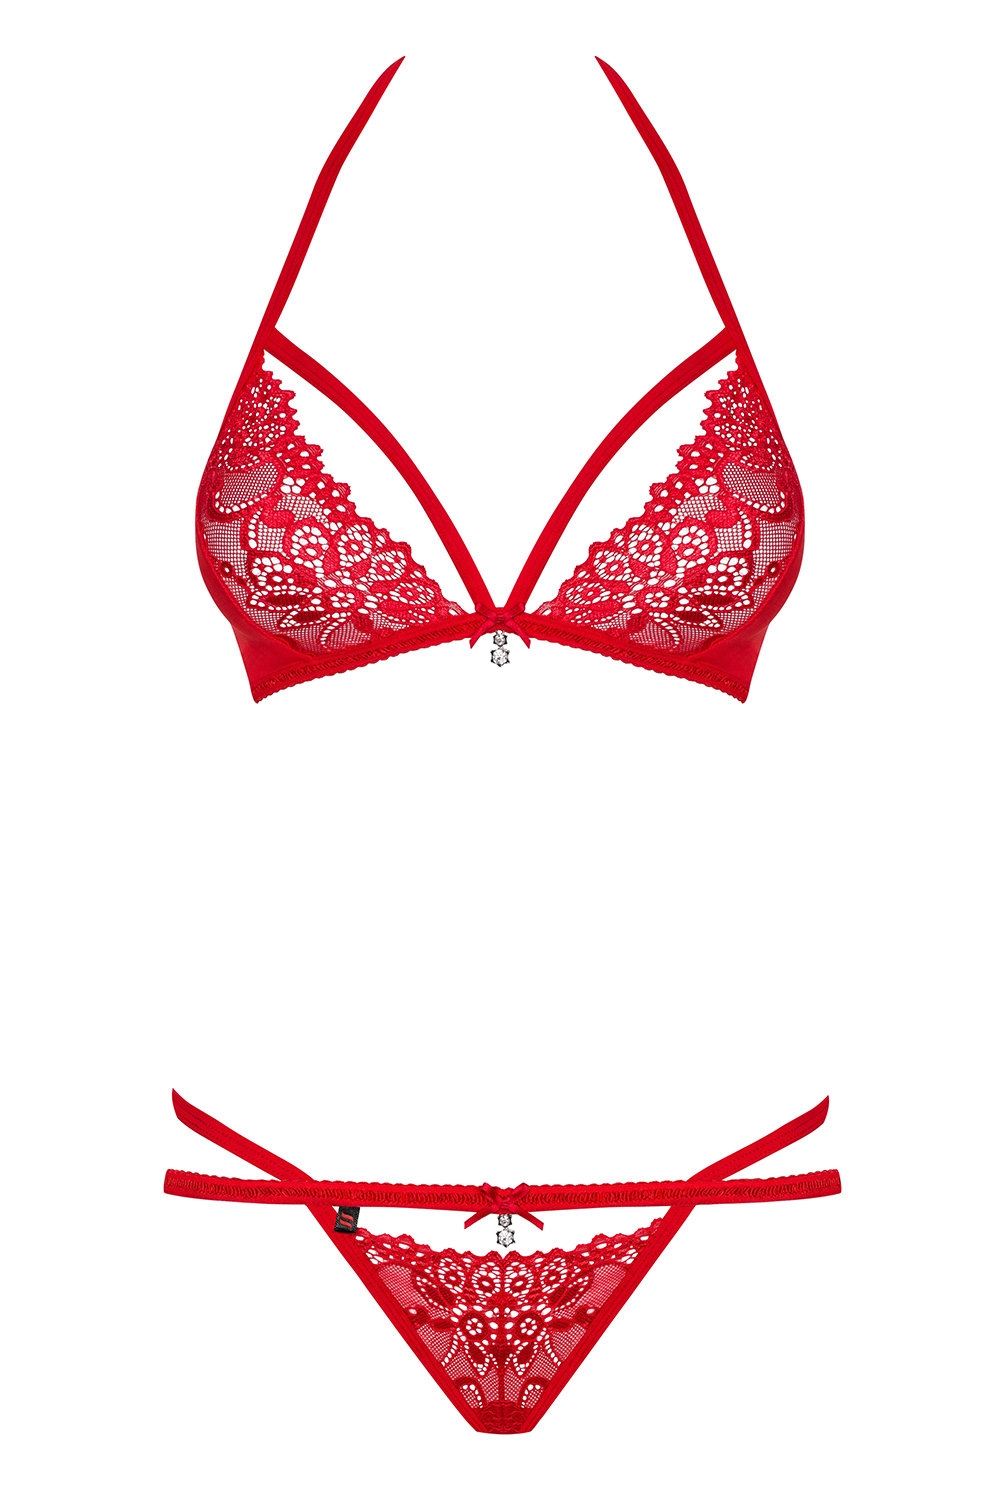 Completino intimo rosso 838-SET-3 Obsessive